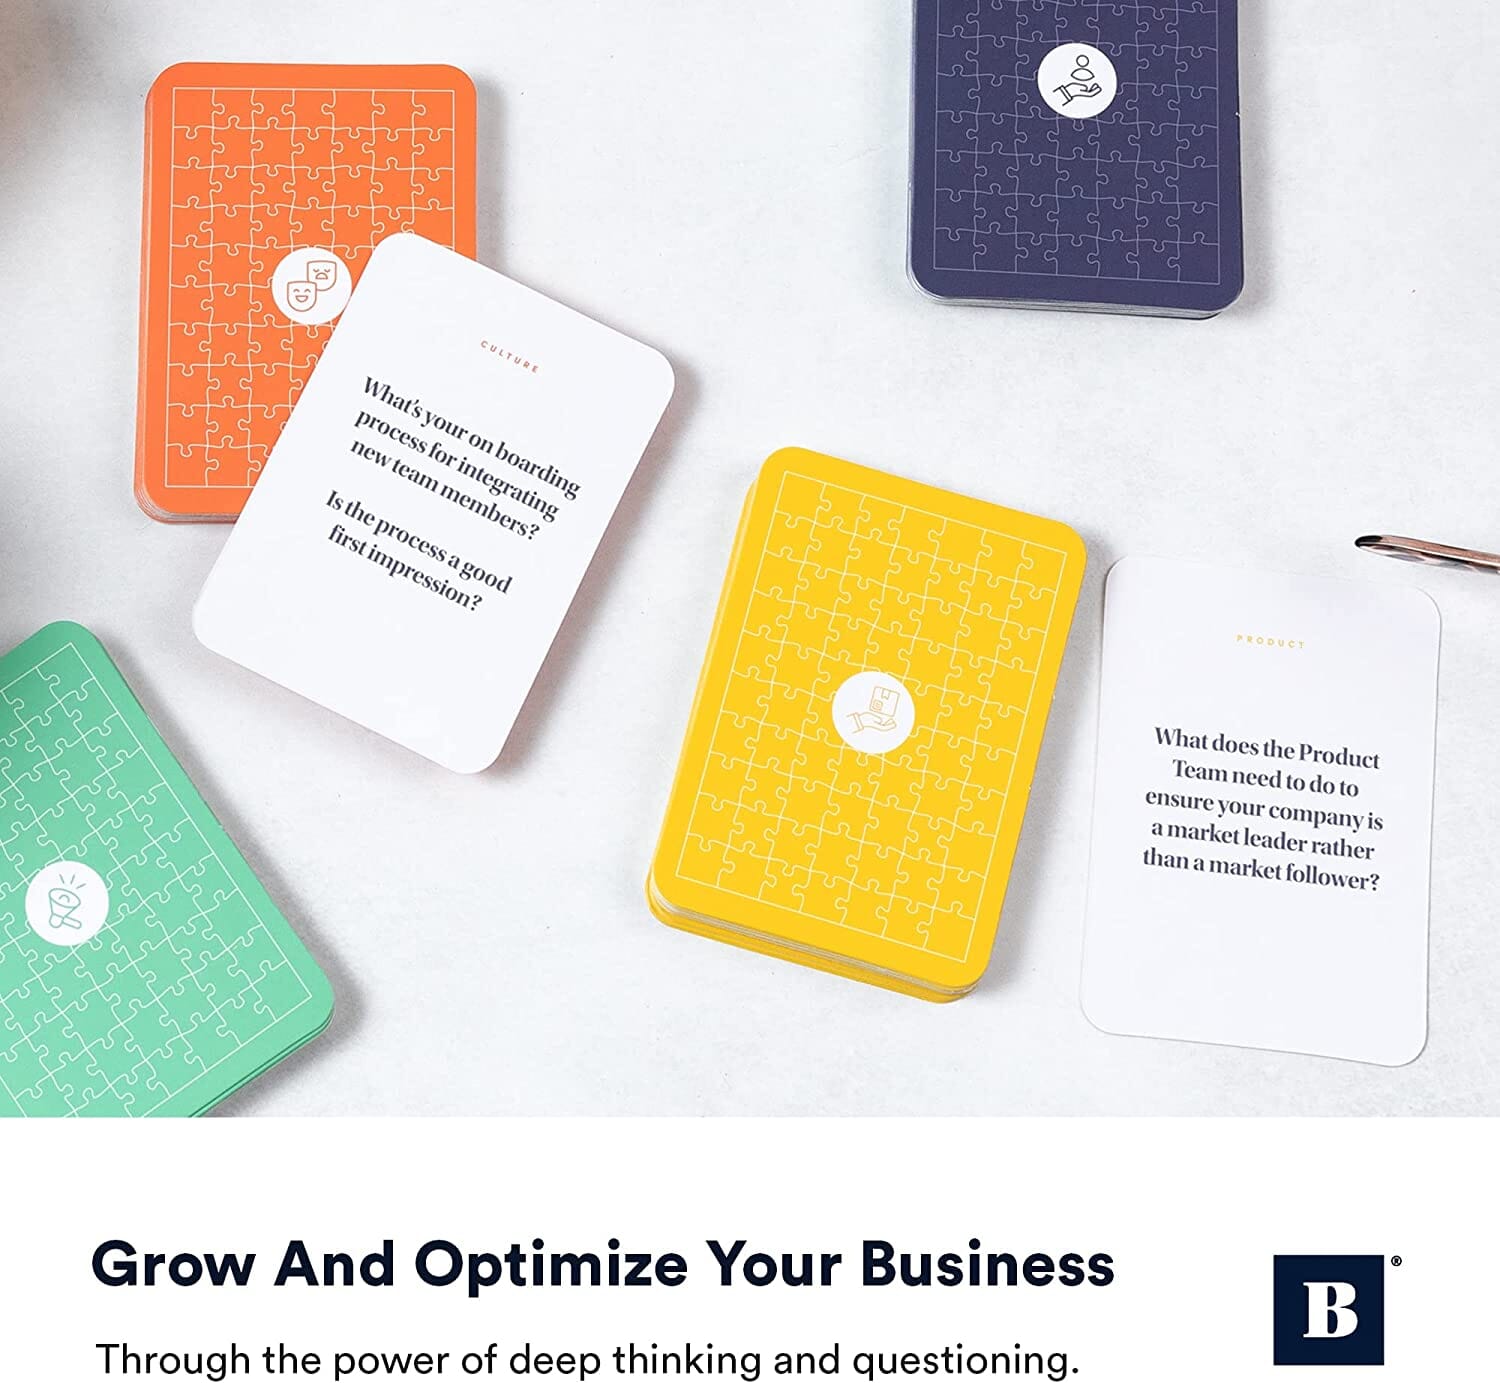 Thinking Time Deck - Business Edition Card Deck Professional Growth